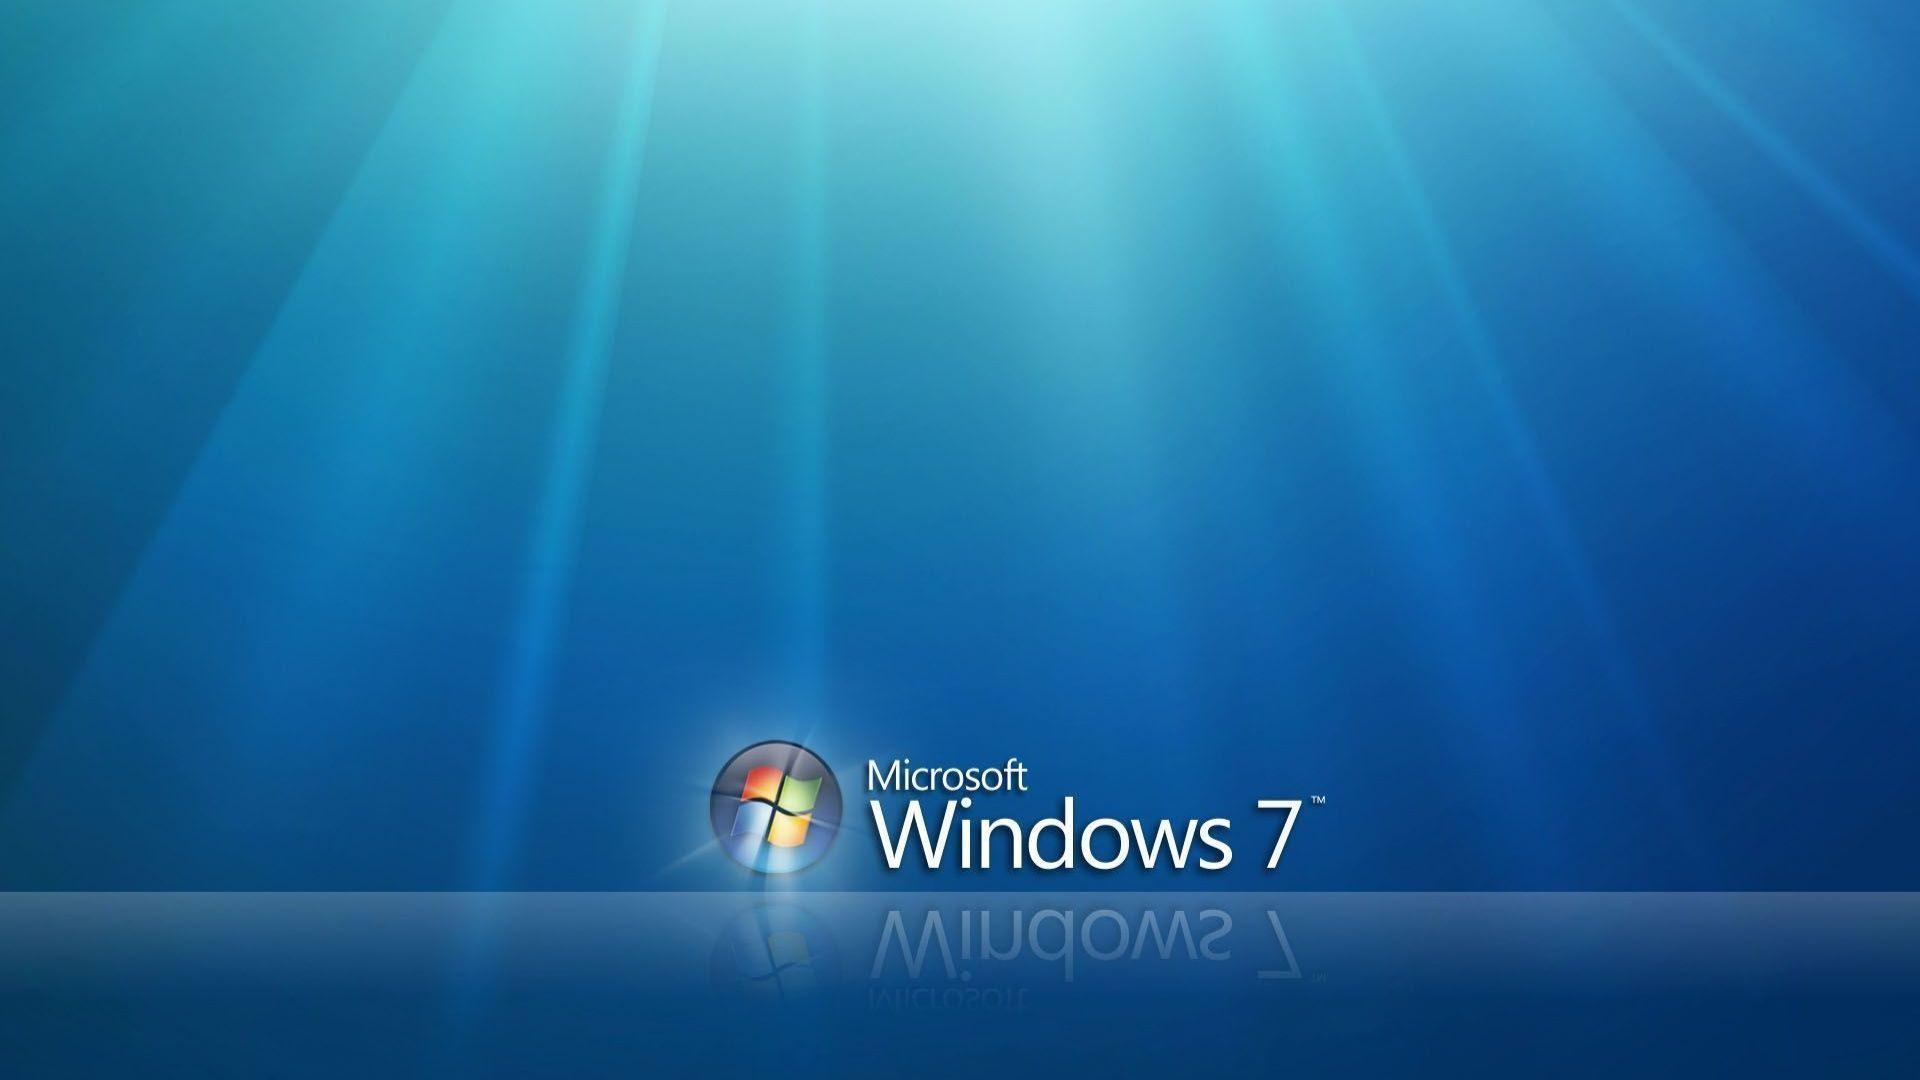 Windows 7 Ultimate Wallpapers 1920x1080 Wallpaper Cave